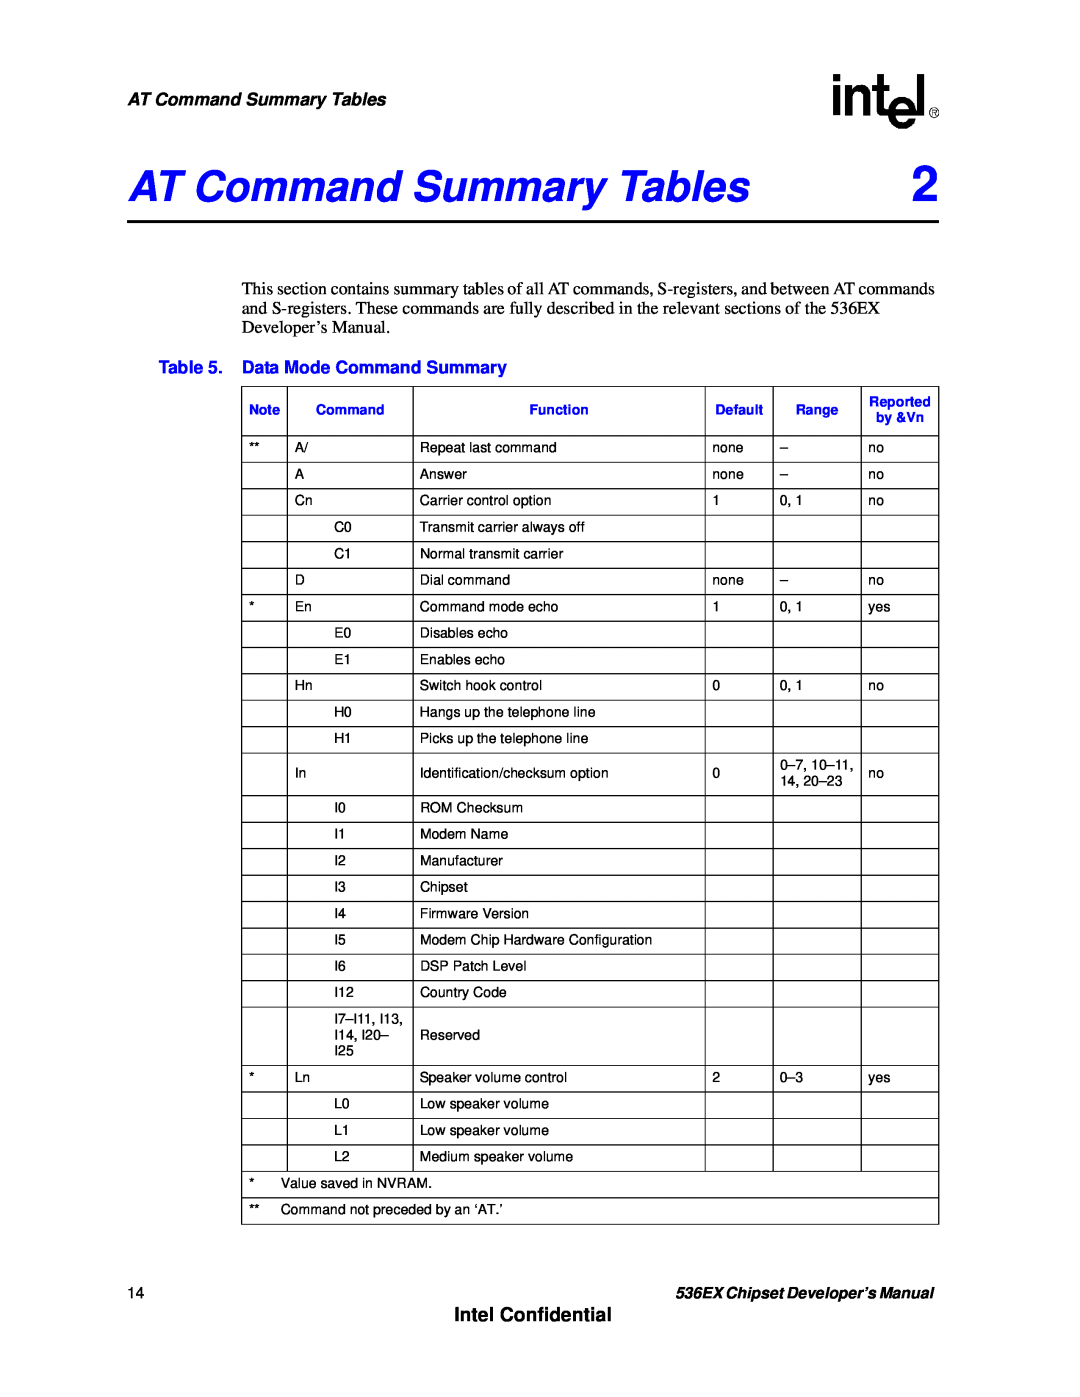 Intel 537EX AT Command Summary Tables, Intel Confidential, Data Mode Command Summary, 536EX Chipset Developer’s Manual 